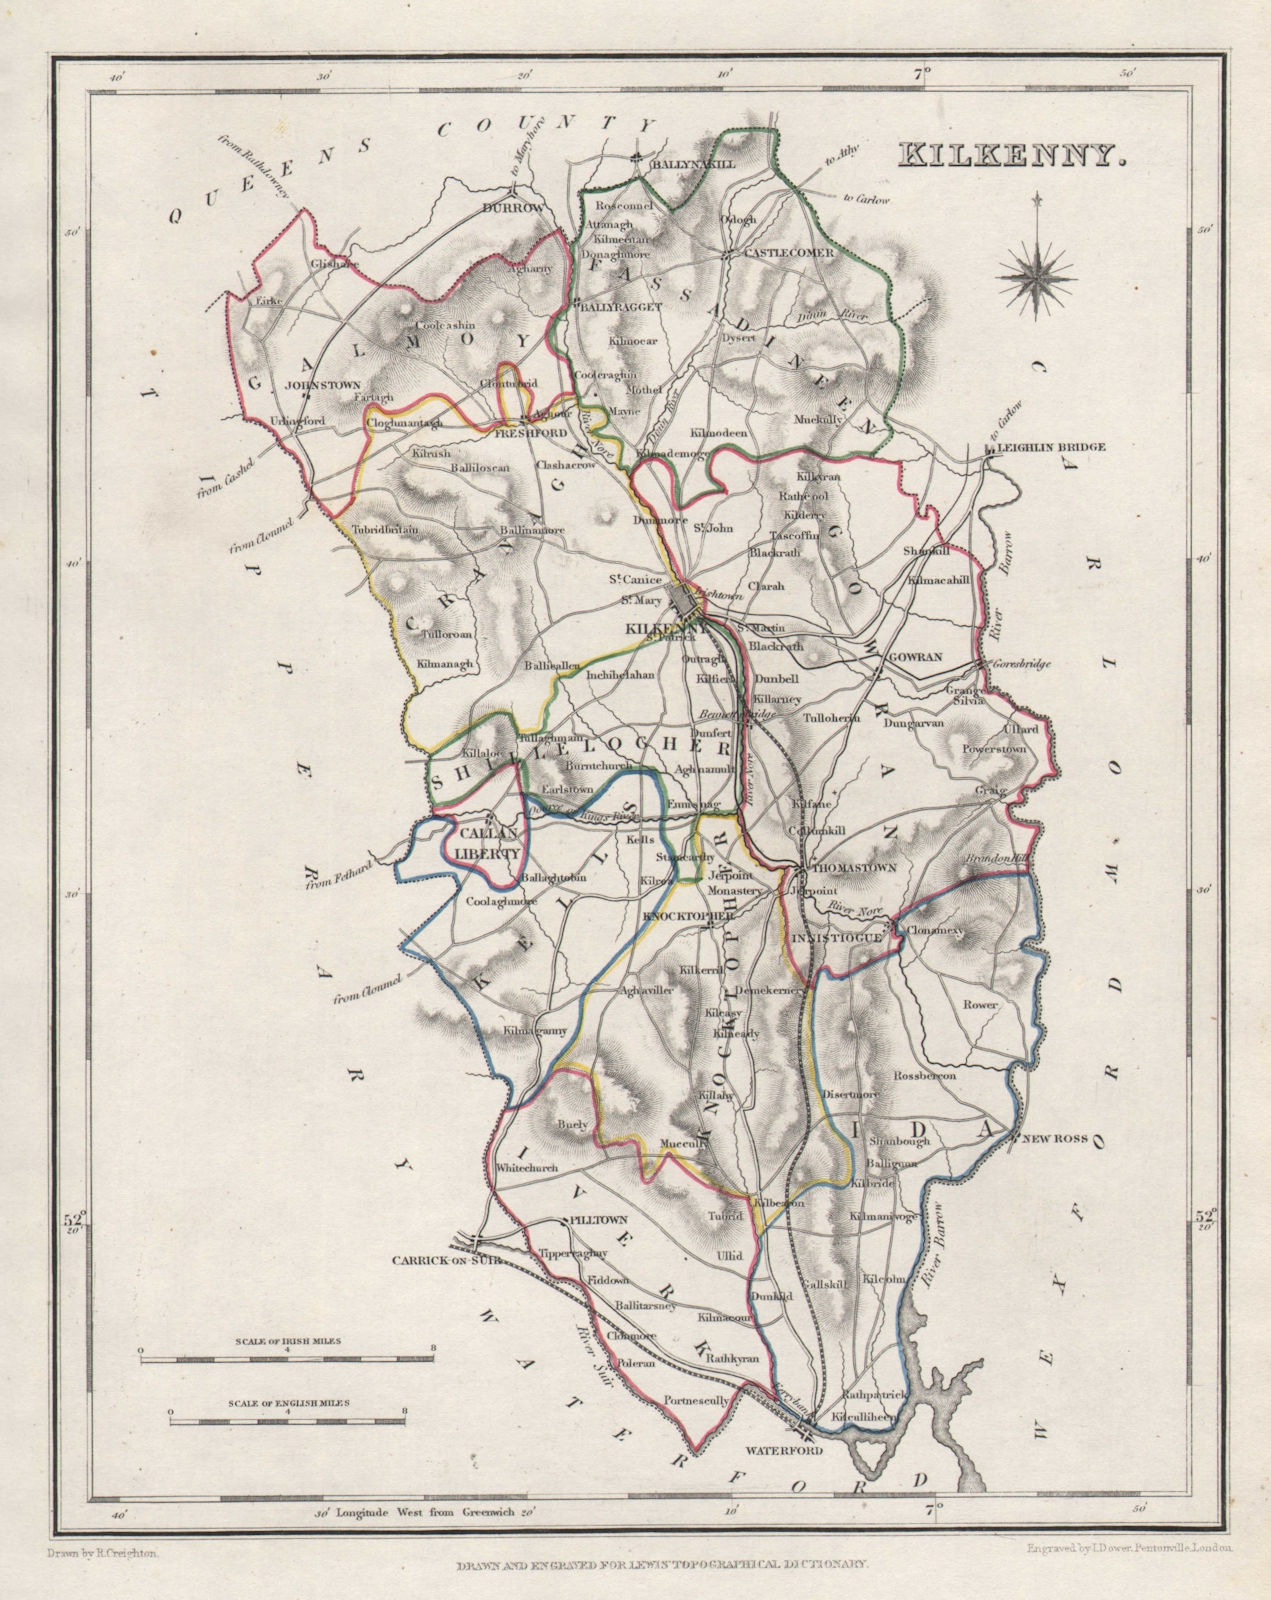 Associate Product COUNTY KILKENNY antique map for LEWIS by CREIGHTON & DOWER. Ireland 1846